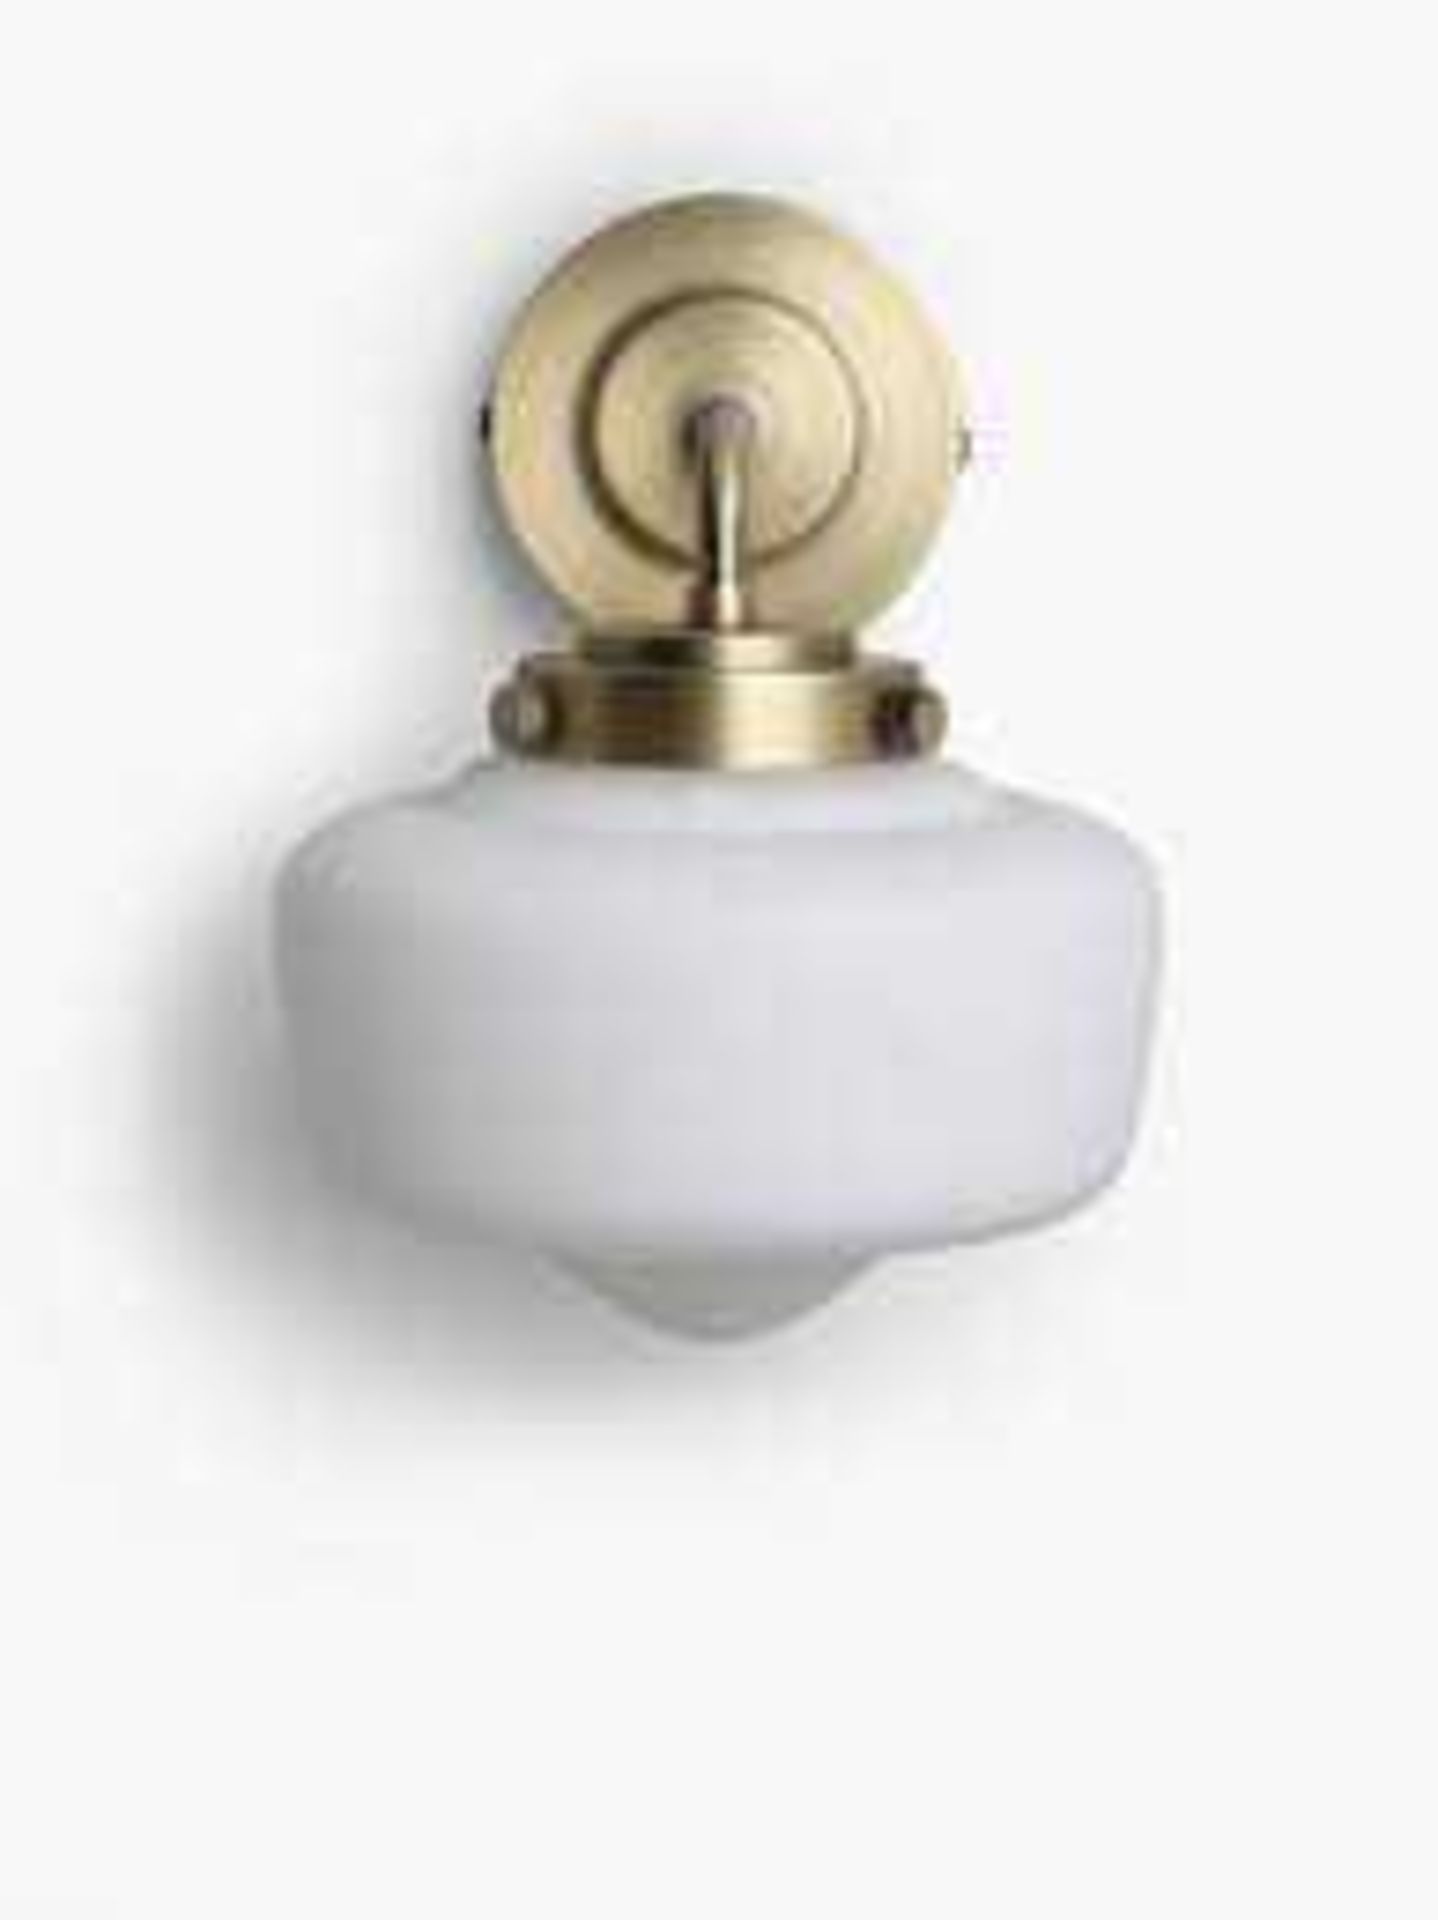 Combined RRP £135 Lot To Contain Two Boxed John Lewis Brasserie School House Bathroom Wall Light In - Image 2 of 3